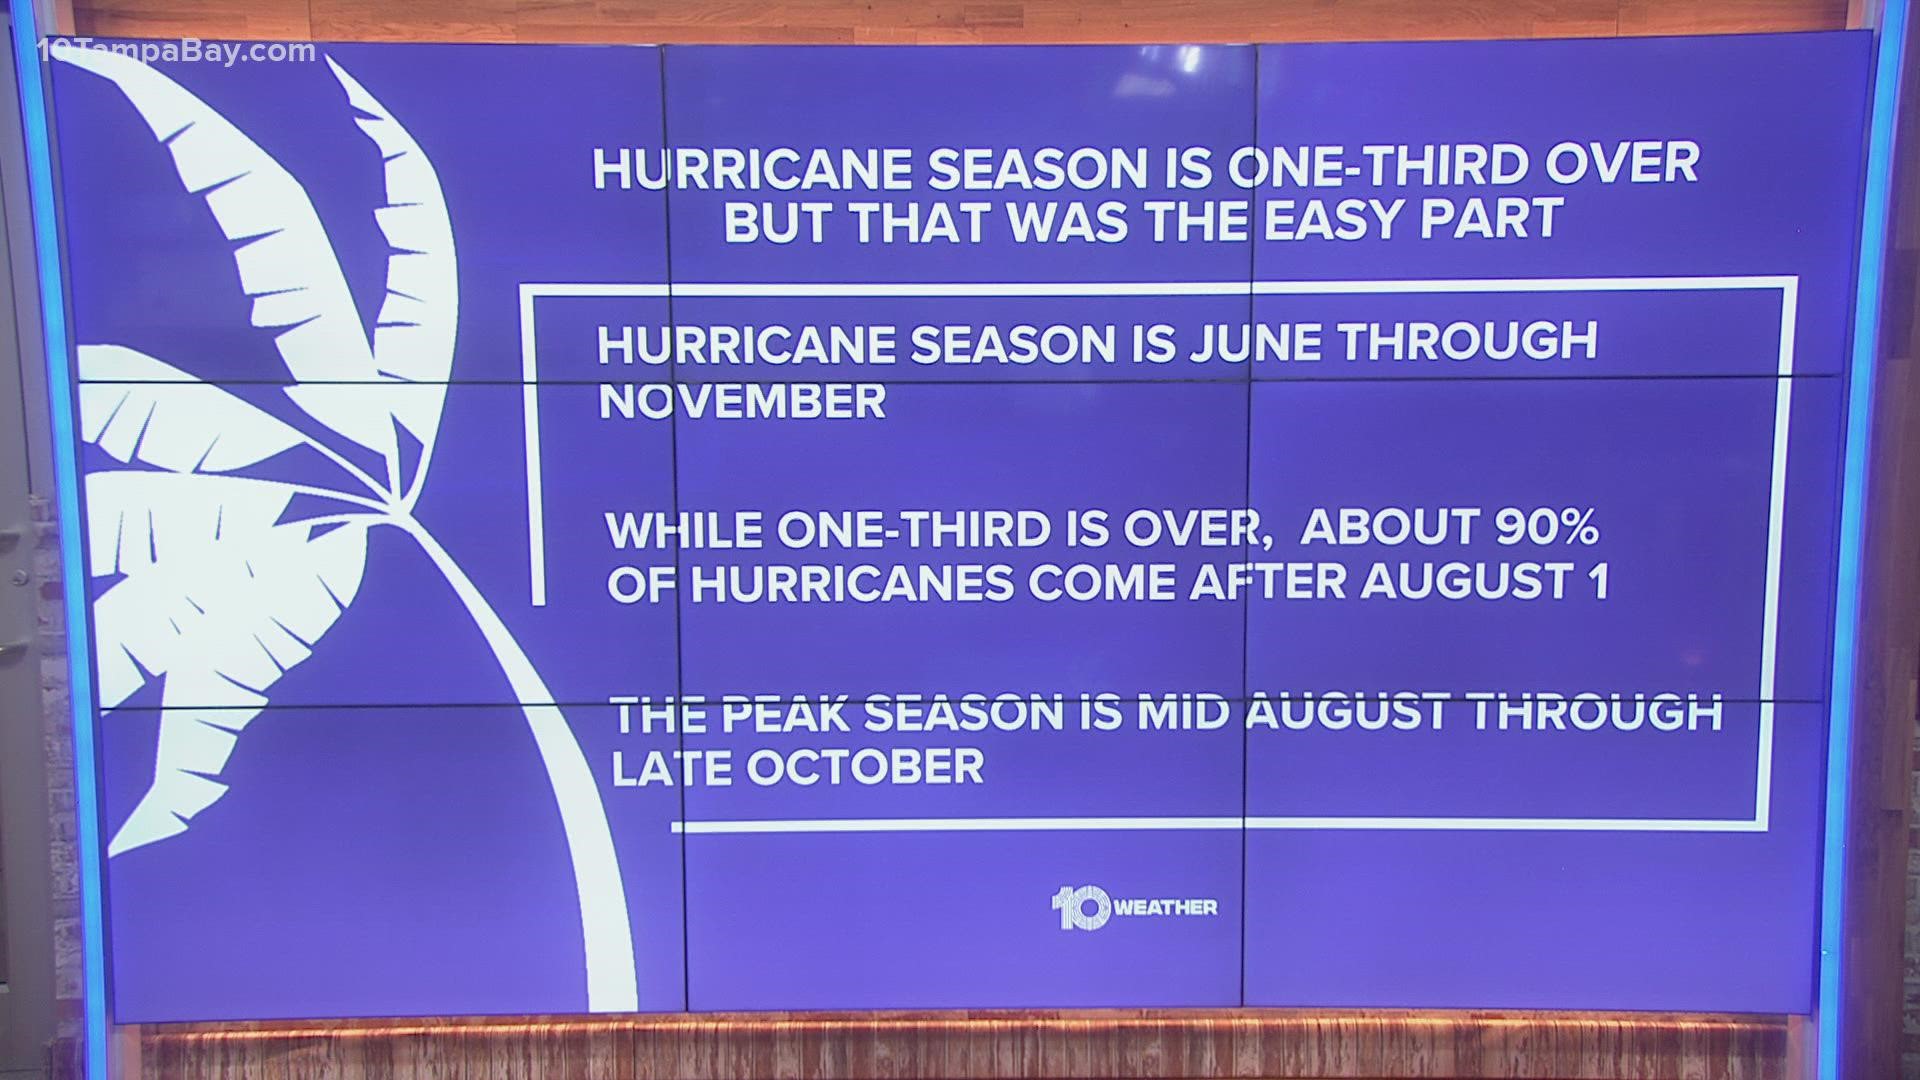 About 90 percent of hurricanes occur after Aug. 1.